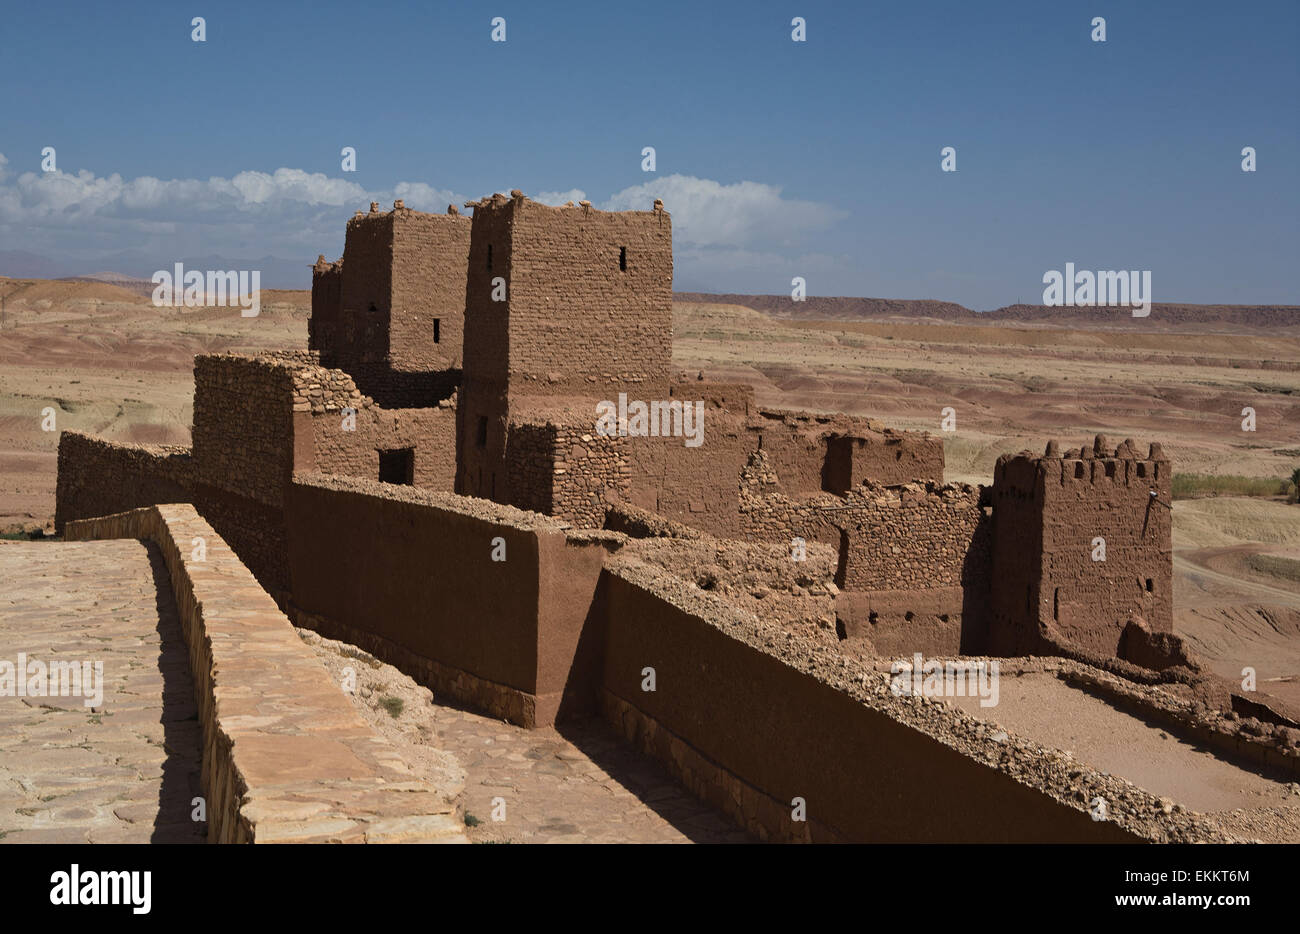 A view of the tall buildings made from clay in Ait Benhaddou Stock Photo